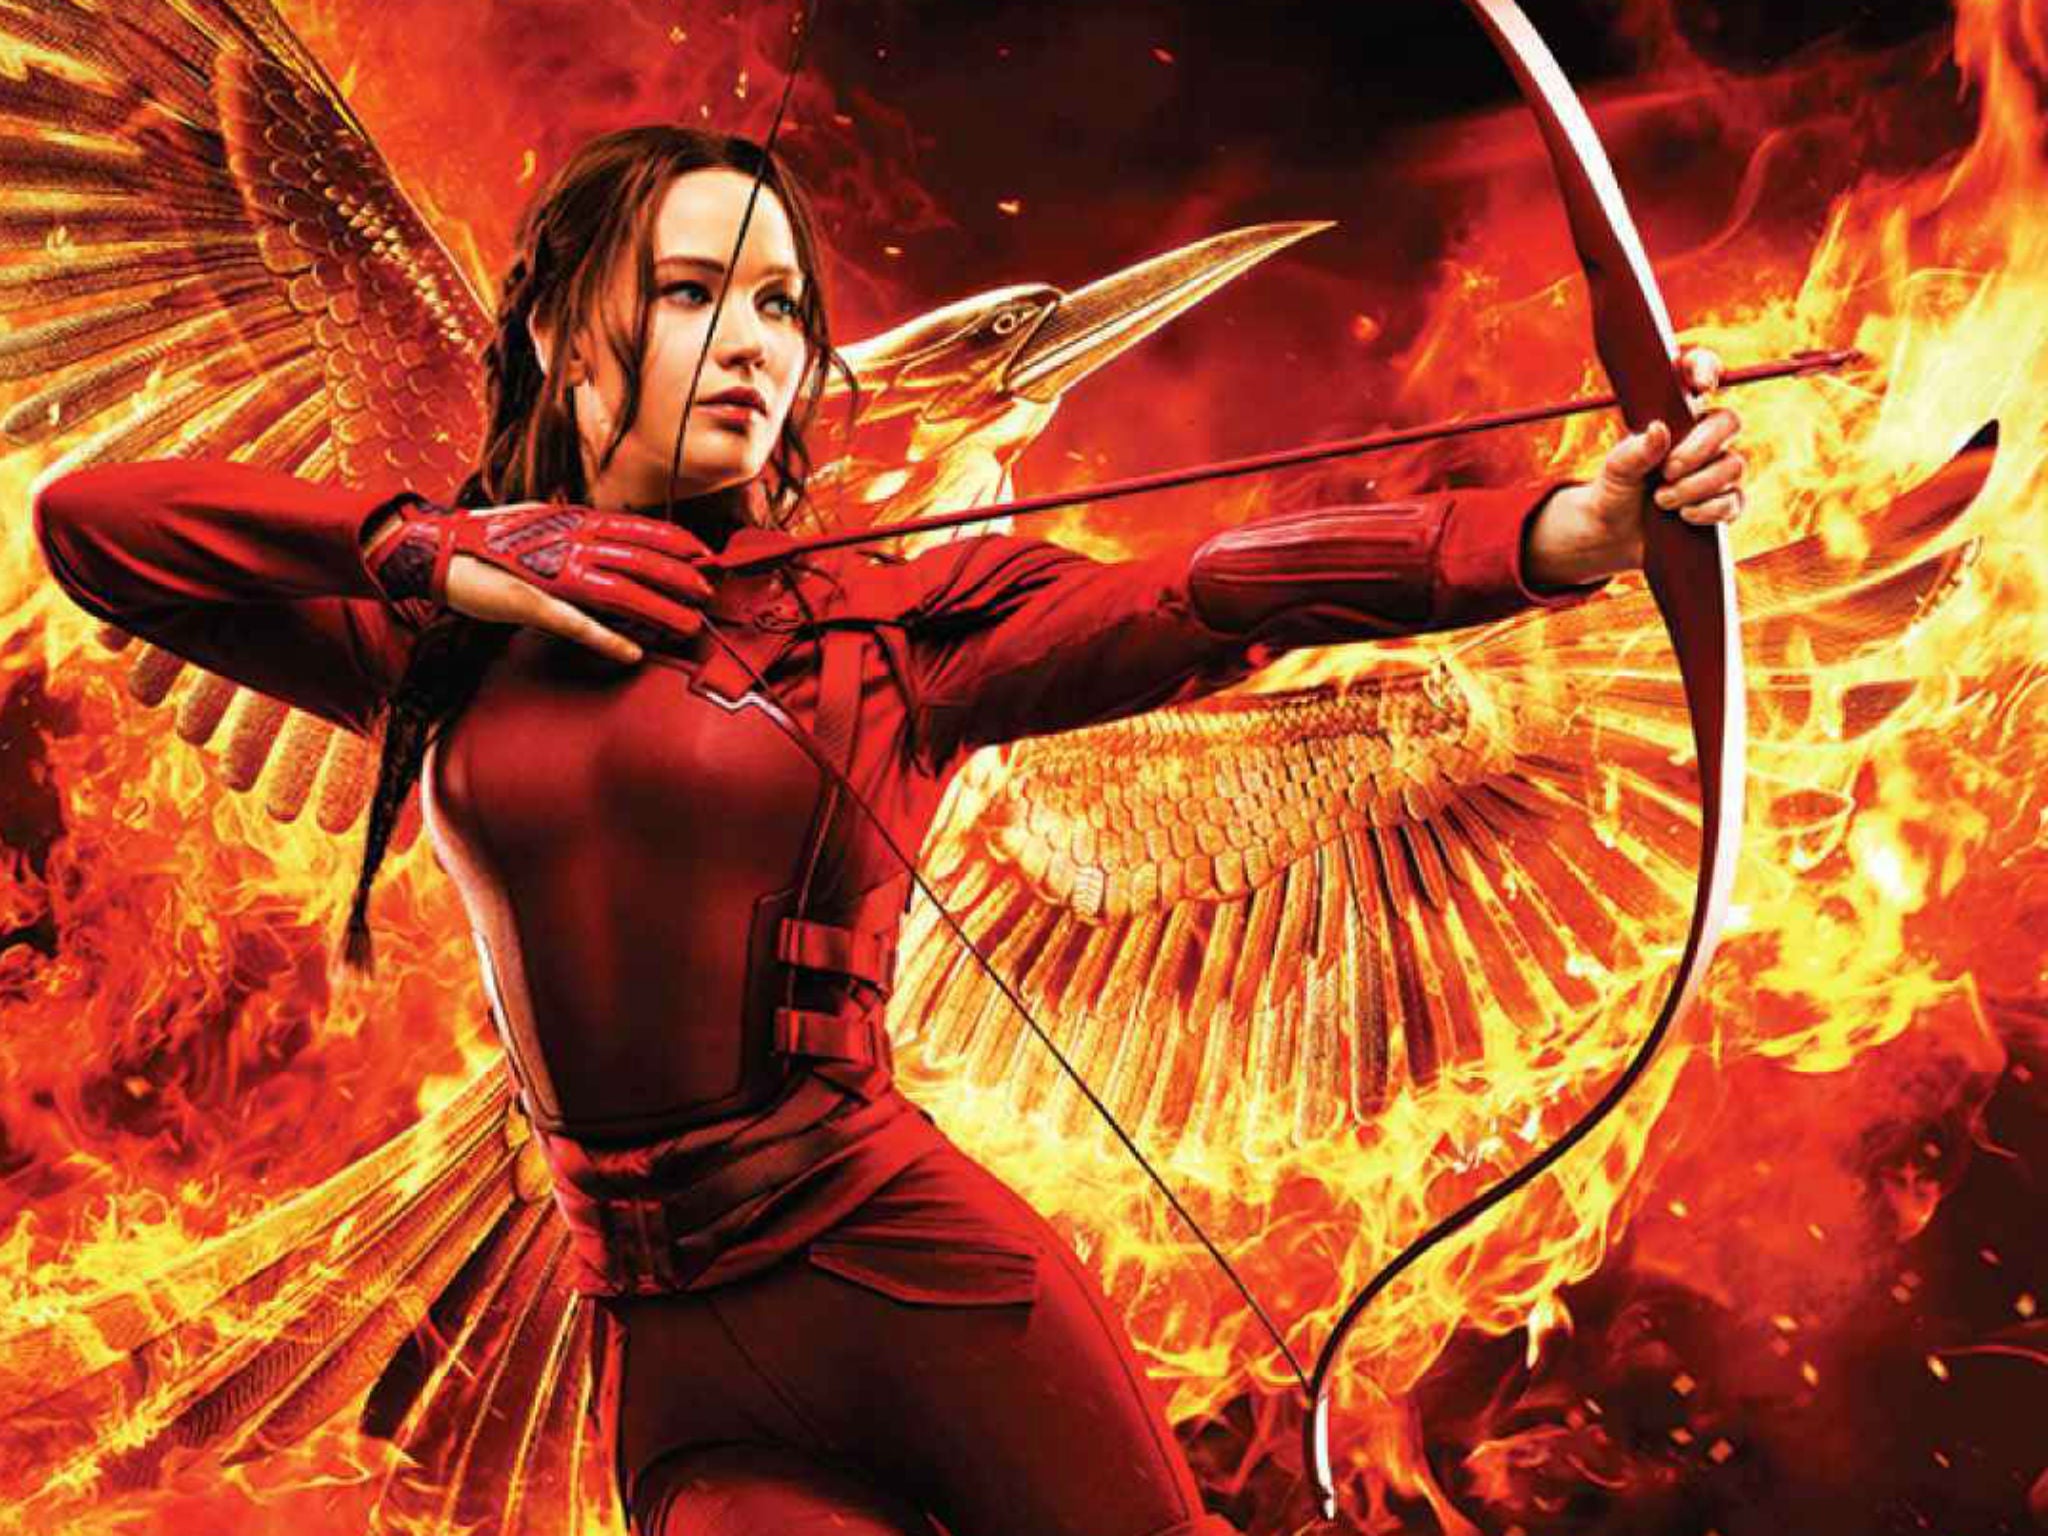 Jennifer Lawrence removed from 'The Hunger Games: Mockingjay